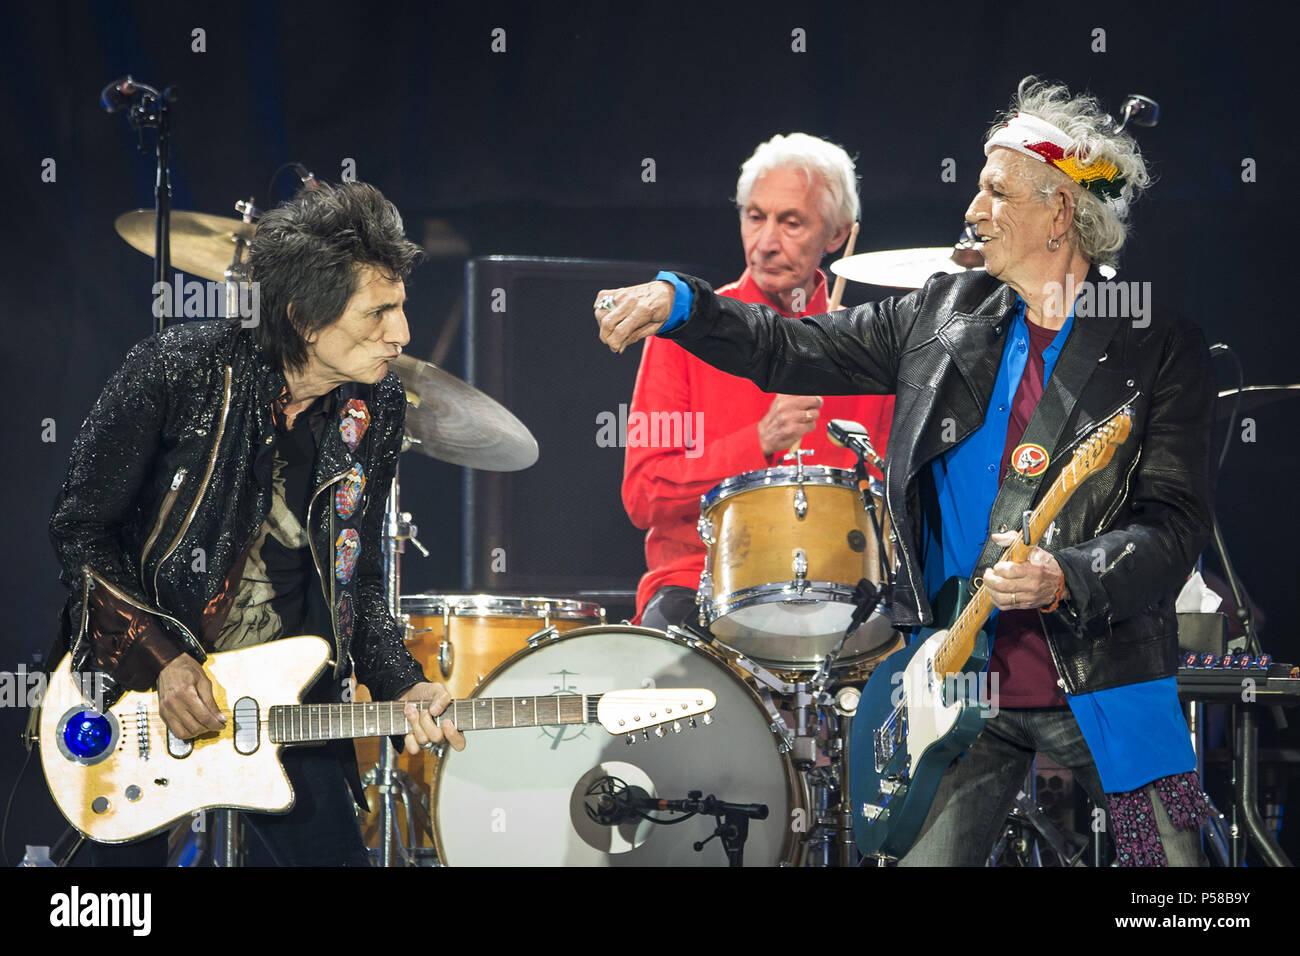 The Rolling Stones perform live at London Stadium Featuring: Ronnie Wood,  Charlie Watts, Keith Richards Where: London, United Kingdom When: 25 May  2018 Credit: Neil Lupin/WENN Stock Photo - Alamy